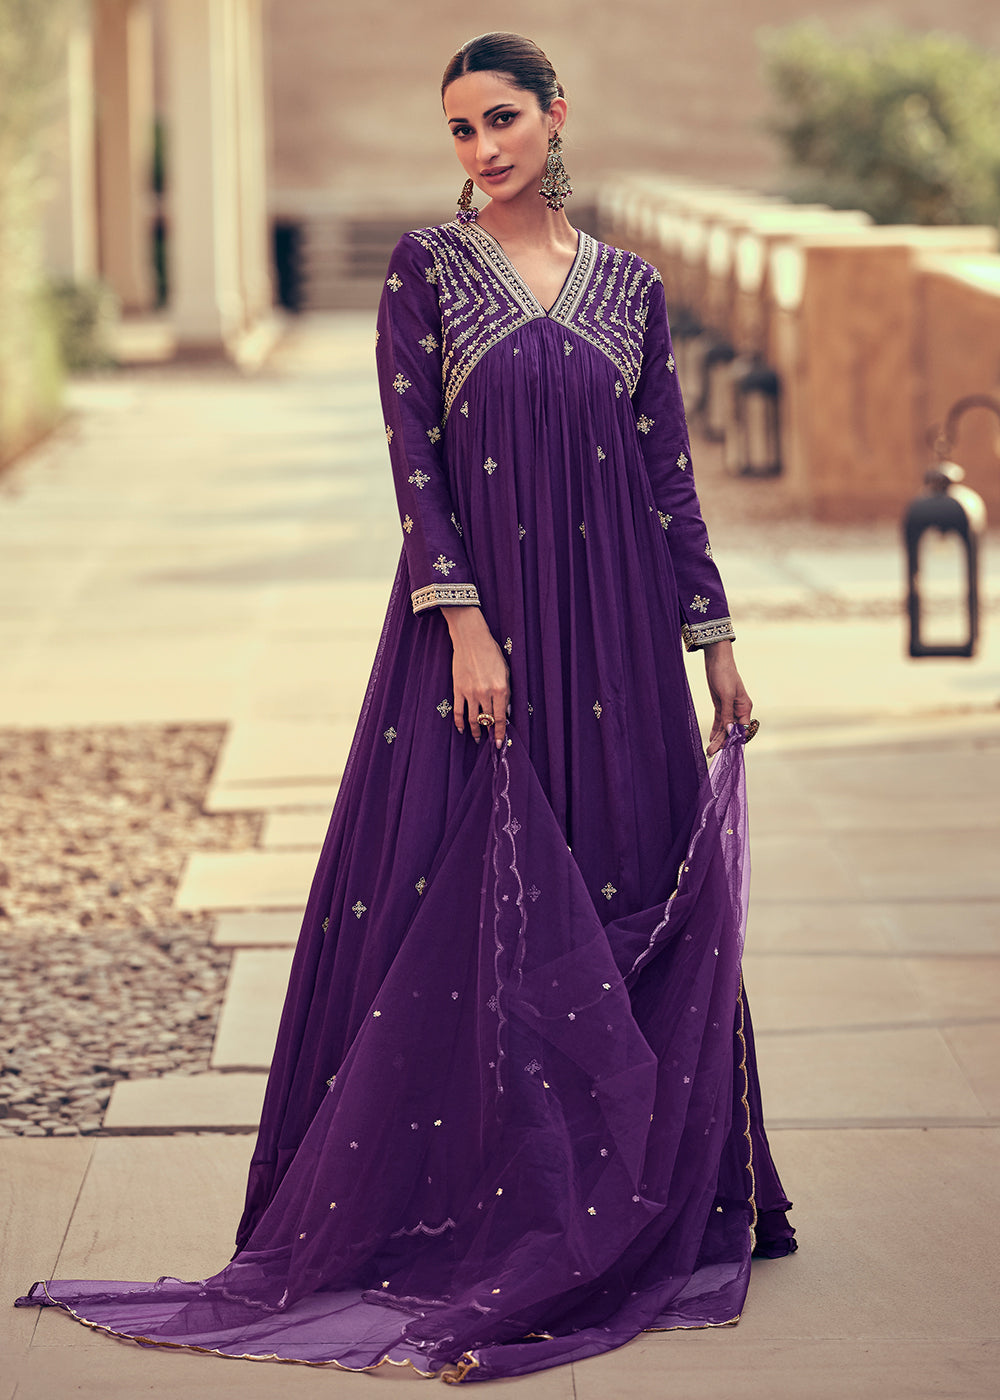 Buy Now Festive Style Purple Embroidered Chinnon Anarkali Suit Online in USA, UK, Australia, New Zealand, Canada & Worldwide at Empress Clothing.